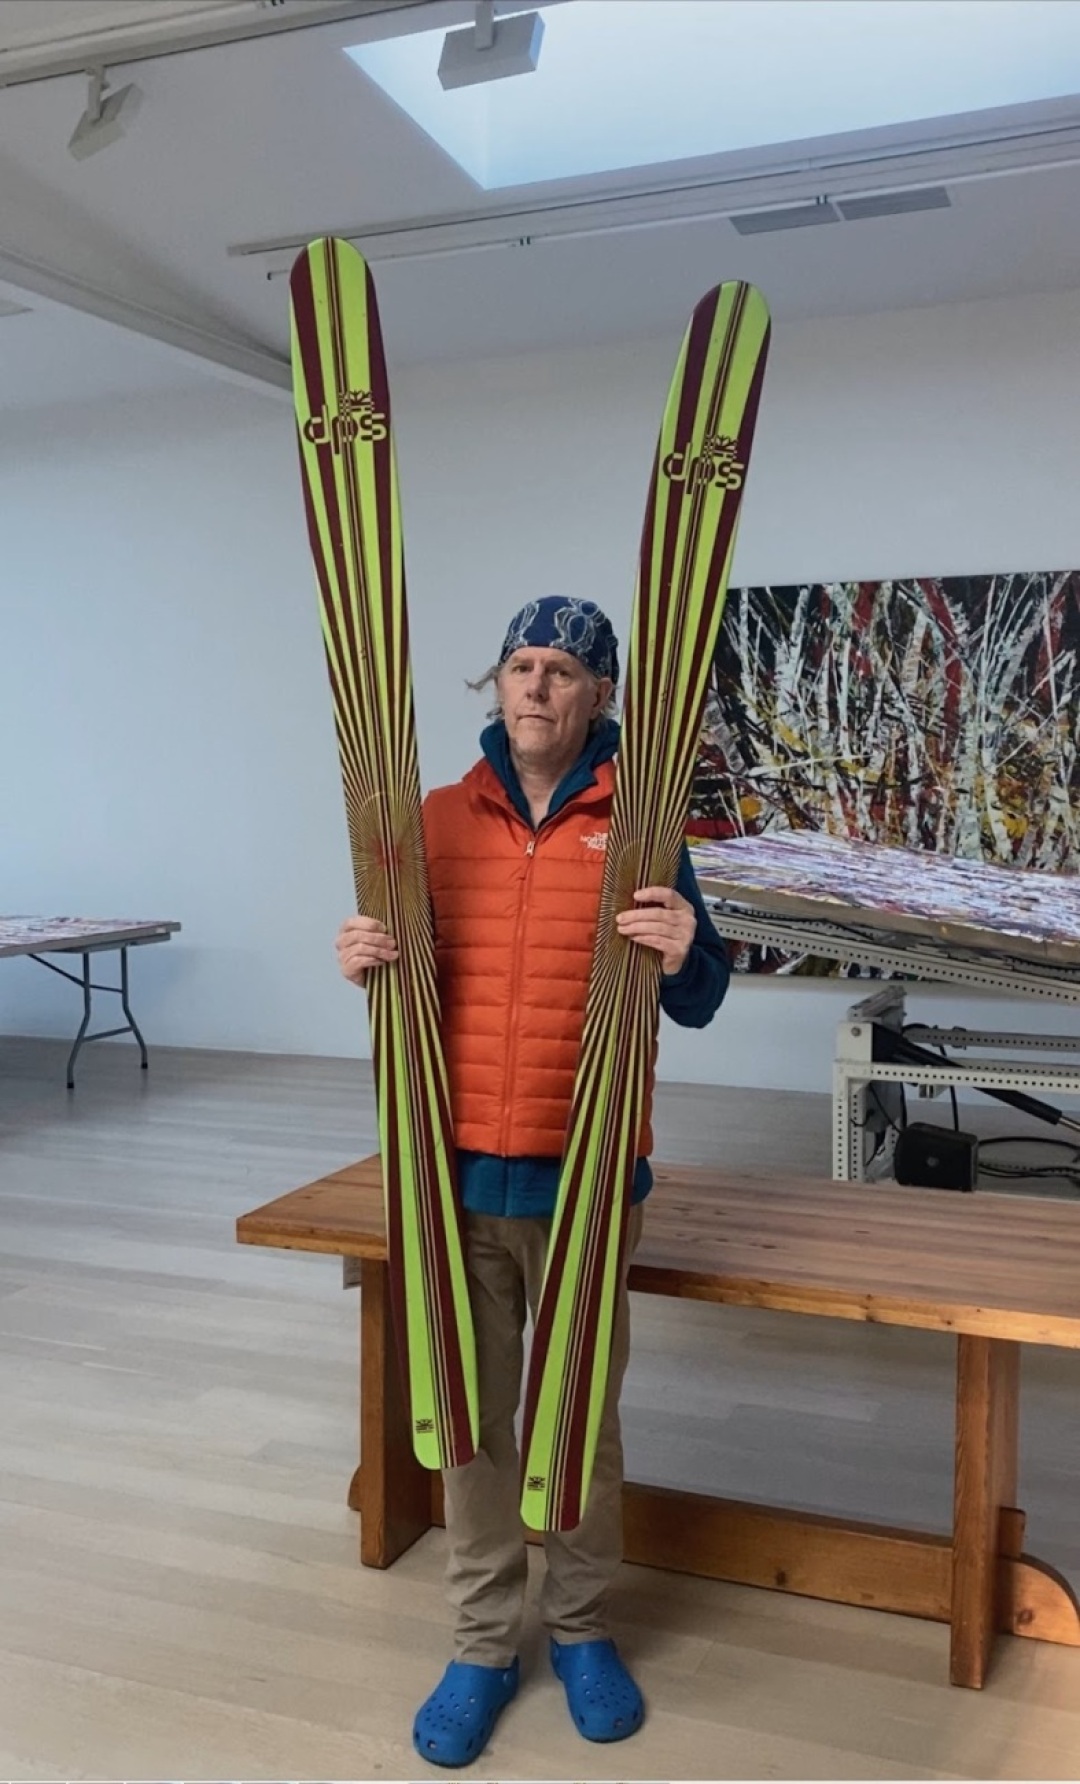 The exhibition will also feature a set of uniquely designed skis by Mark in collaboration with DPS. An avid skier himself, the design on the skis are reminiscent of works from his earlier Butterfly series.